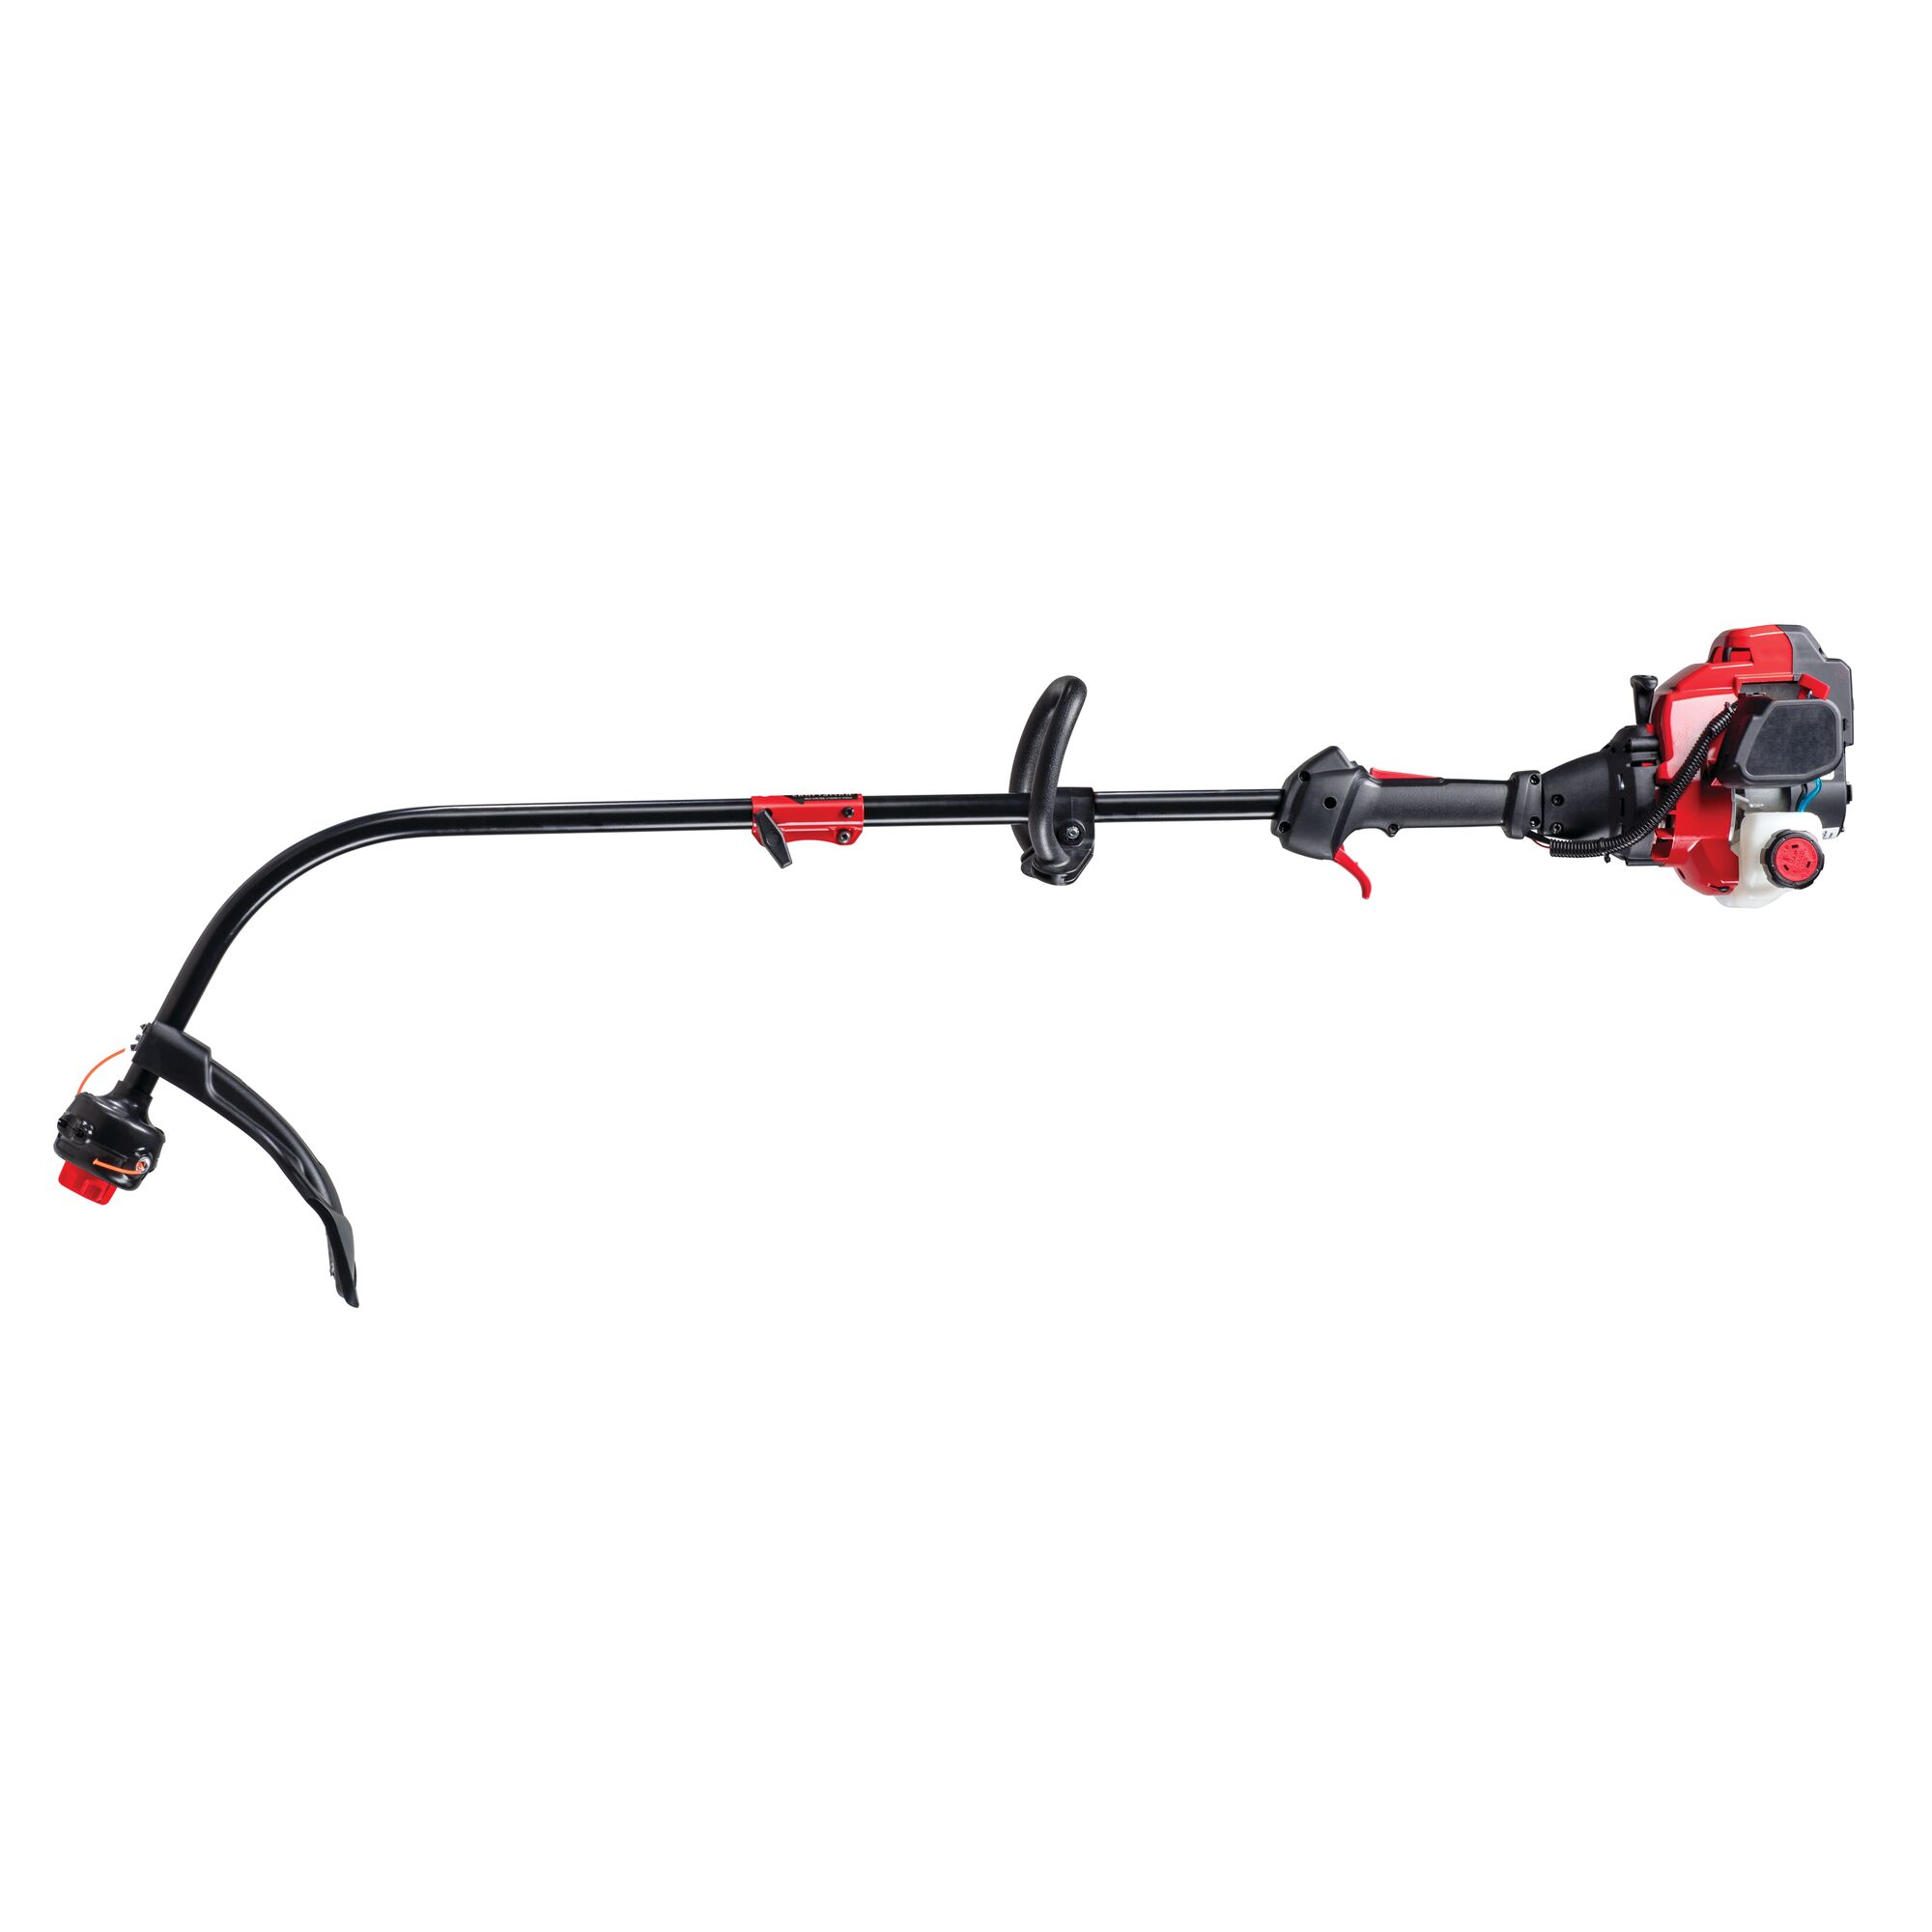 Profile of 2 Cycle 17 inch curved shaft gas weedwacker trimmer.